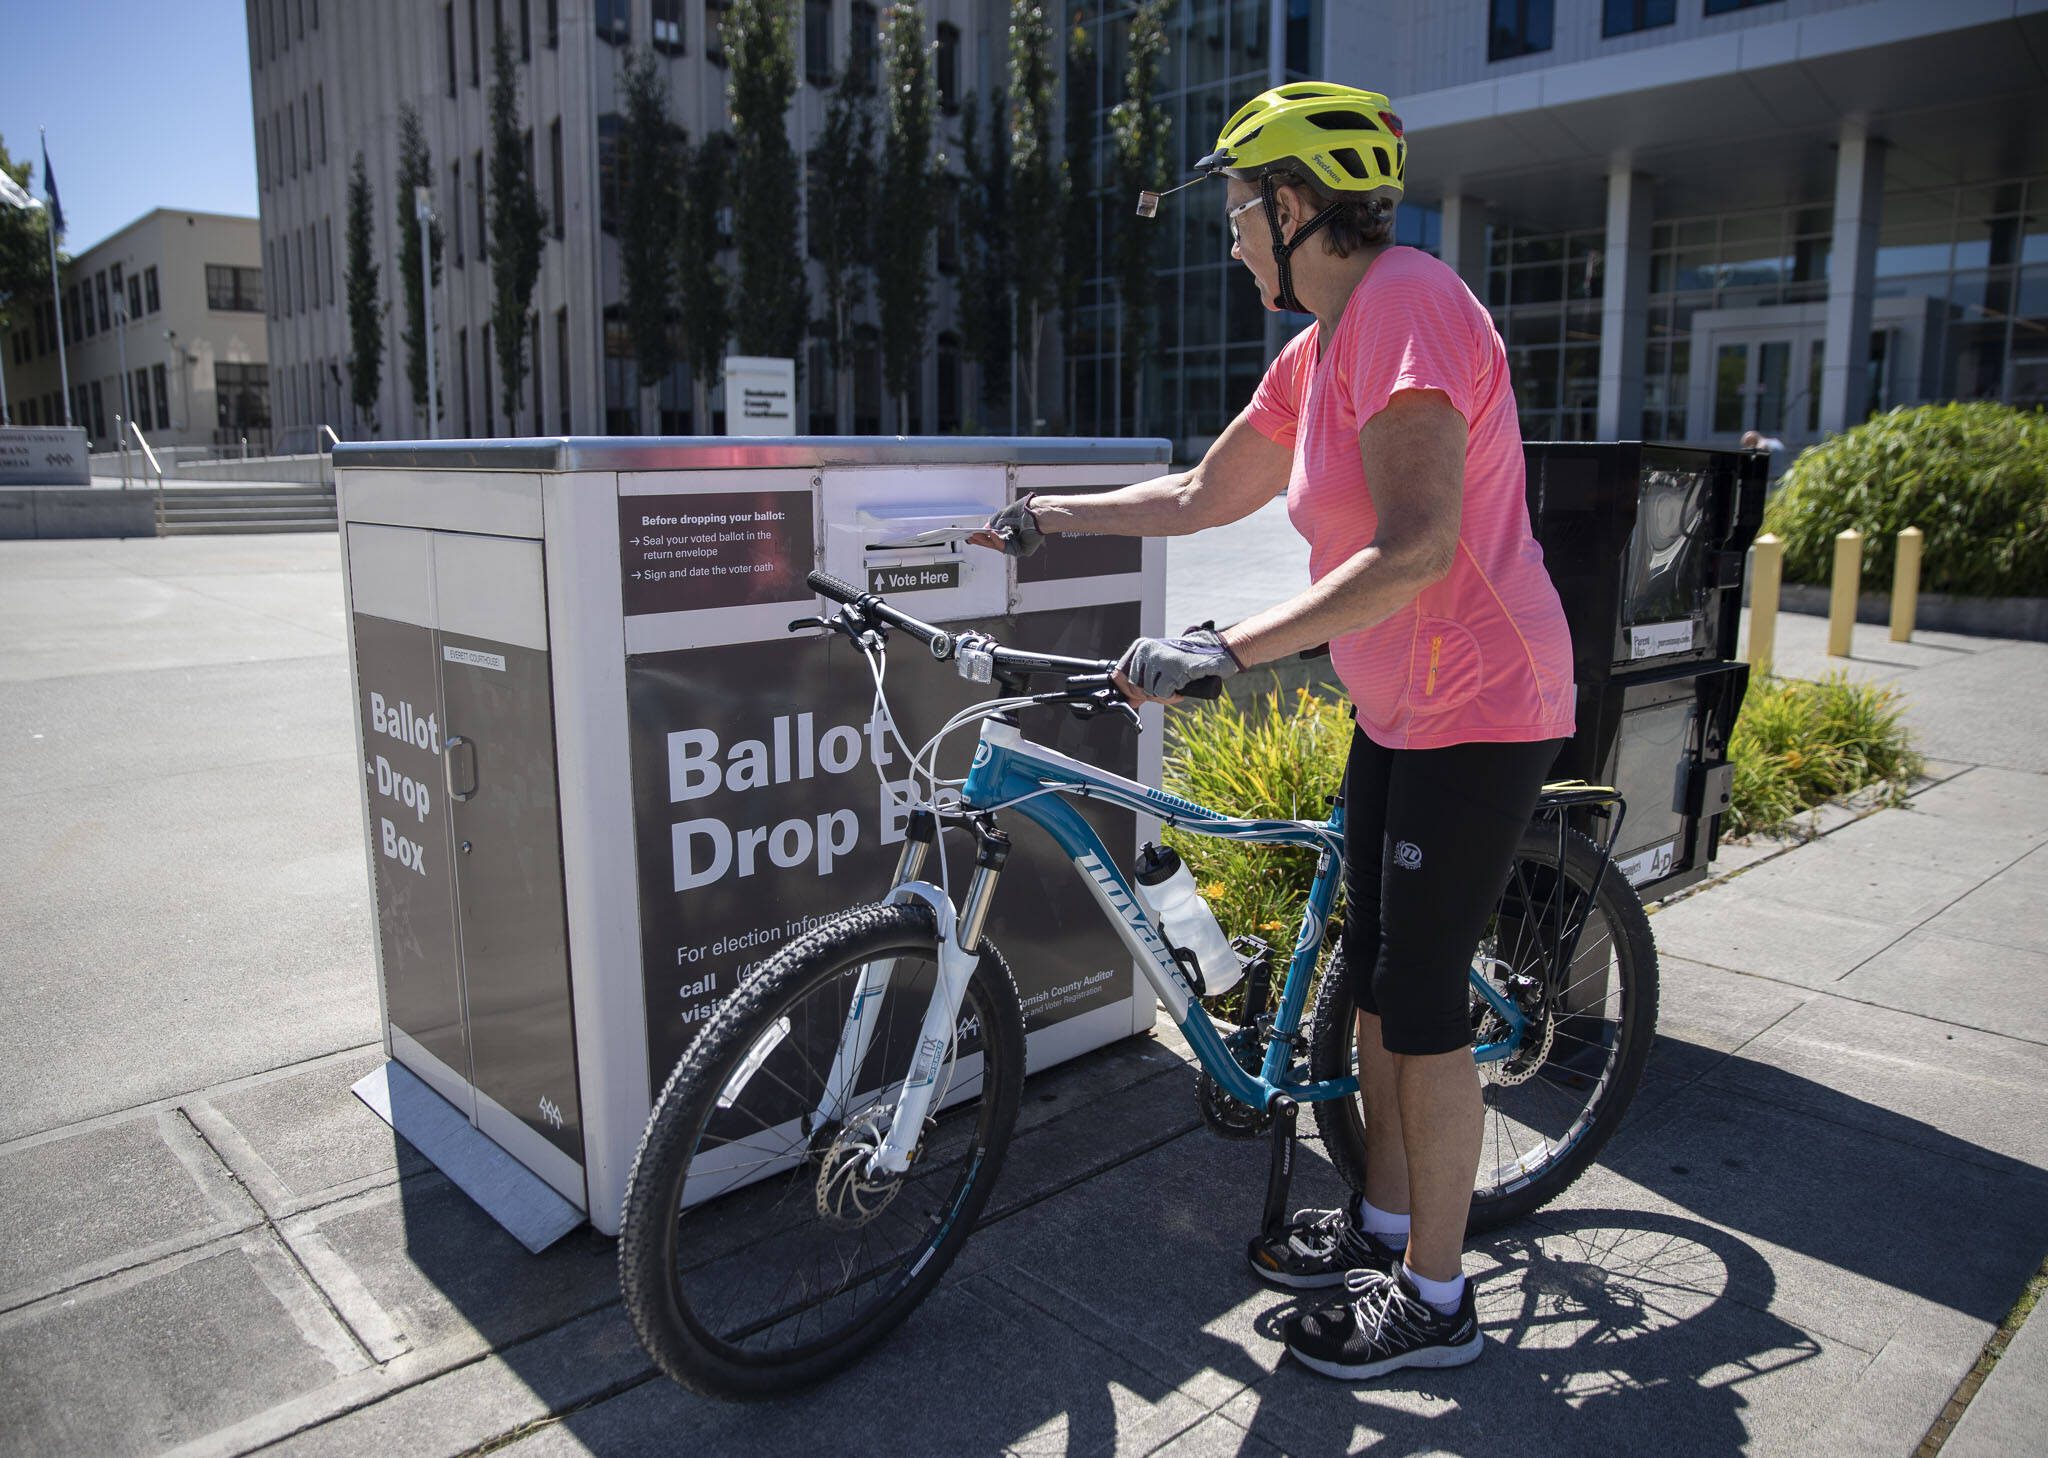 Dorothy Crossman rides up on her bike to turn in her ballot on Tuesday, Aug. 1, 2023 in Everett, Washington. (Olivia Vanni / The Herald)